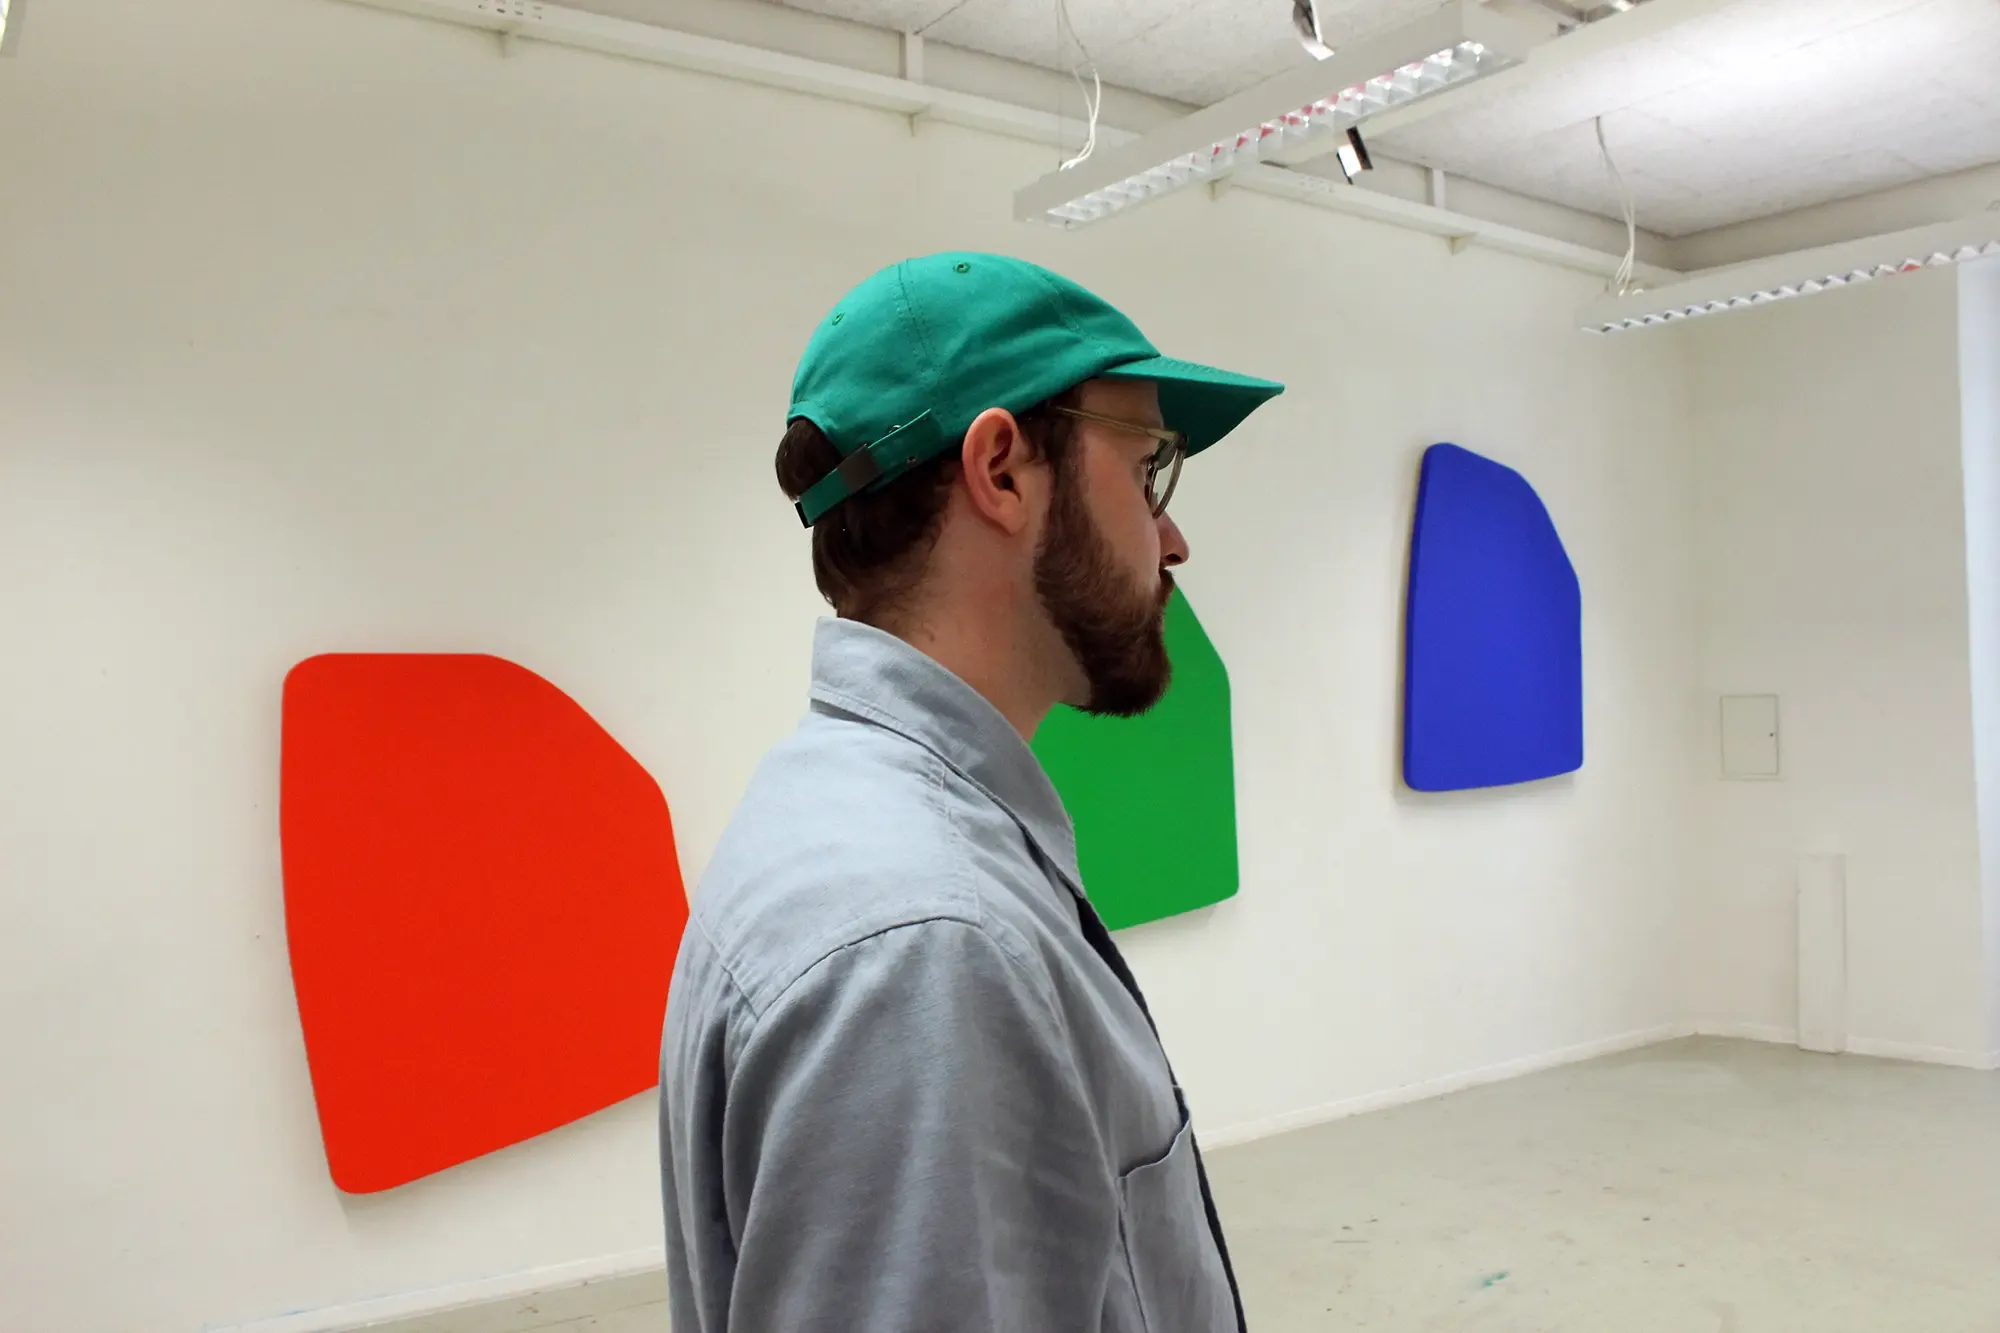 hendrick dialer, in front of his color work , red, green, blue at art university linz, munchies art club feature